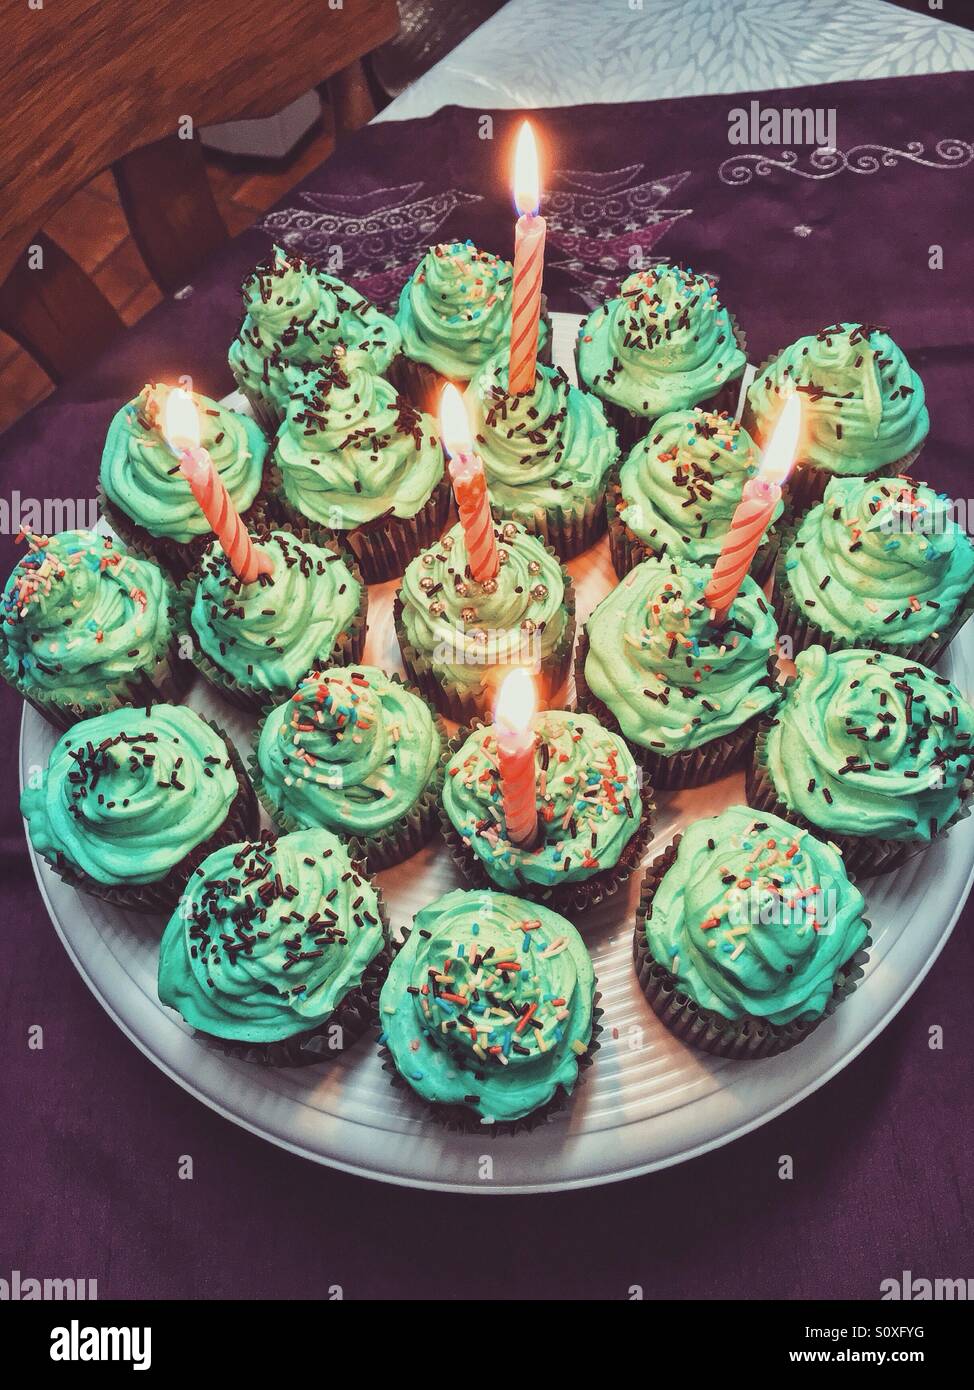 Chocolate cupcakes with green icing. Stock Photo